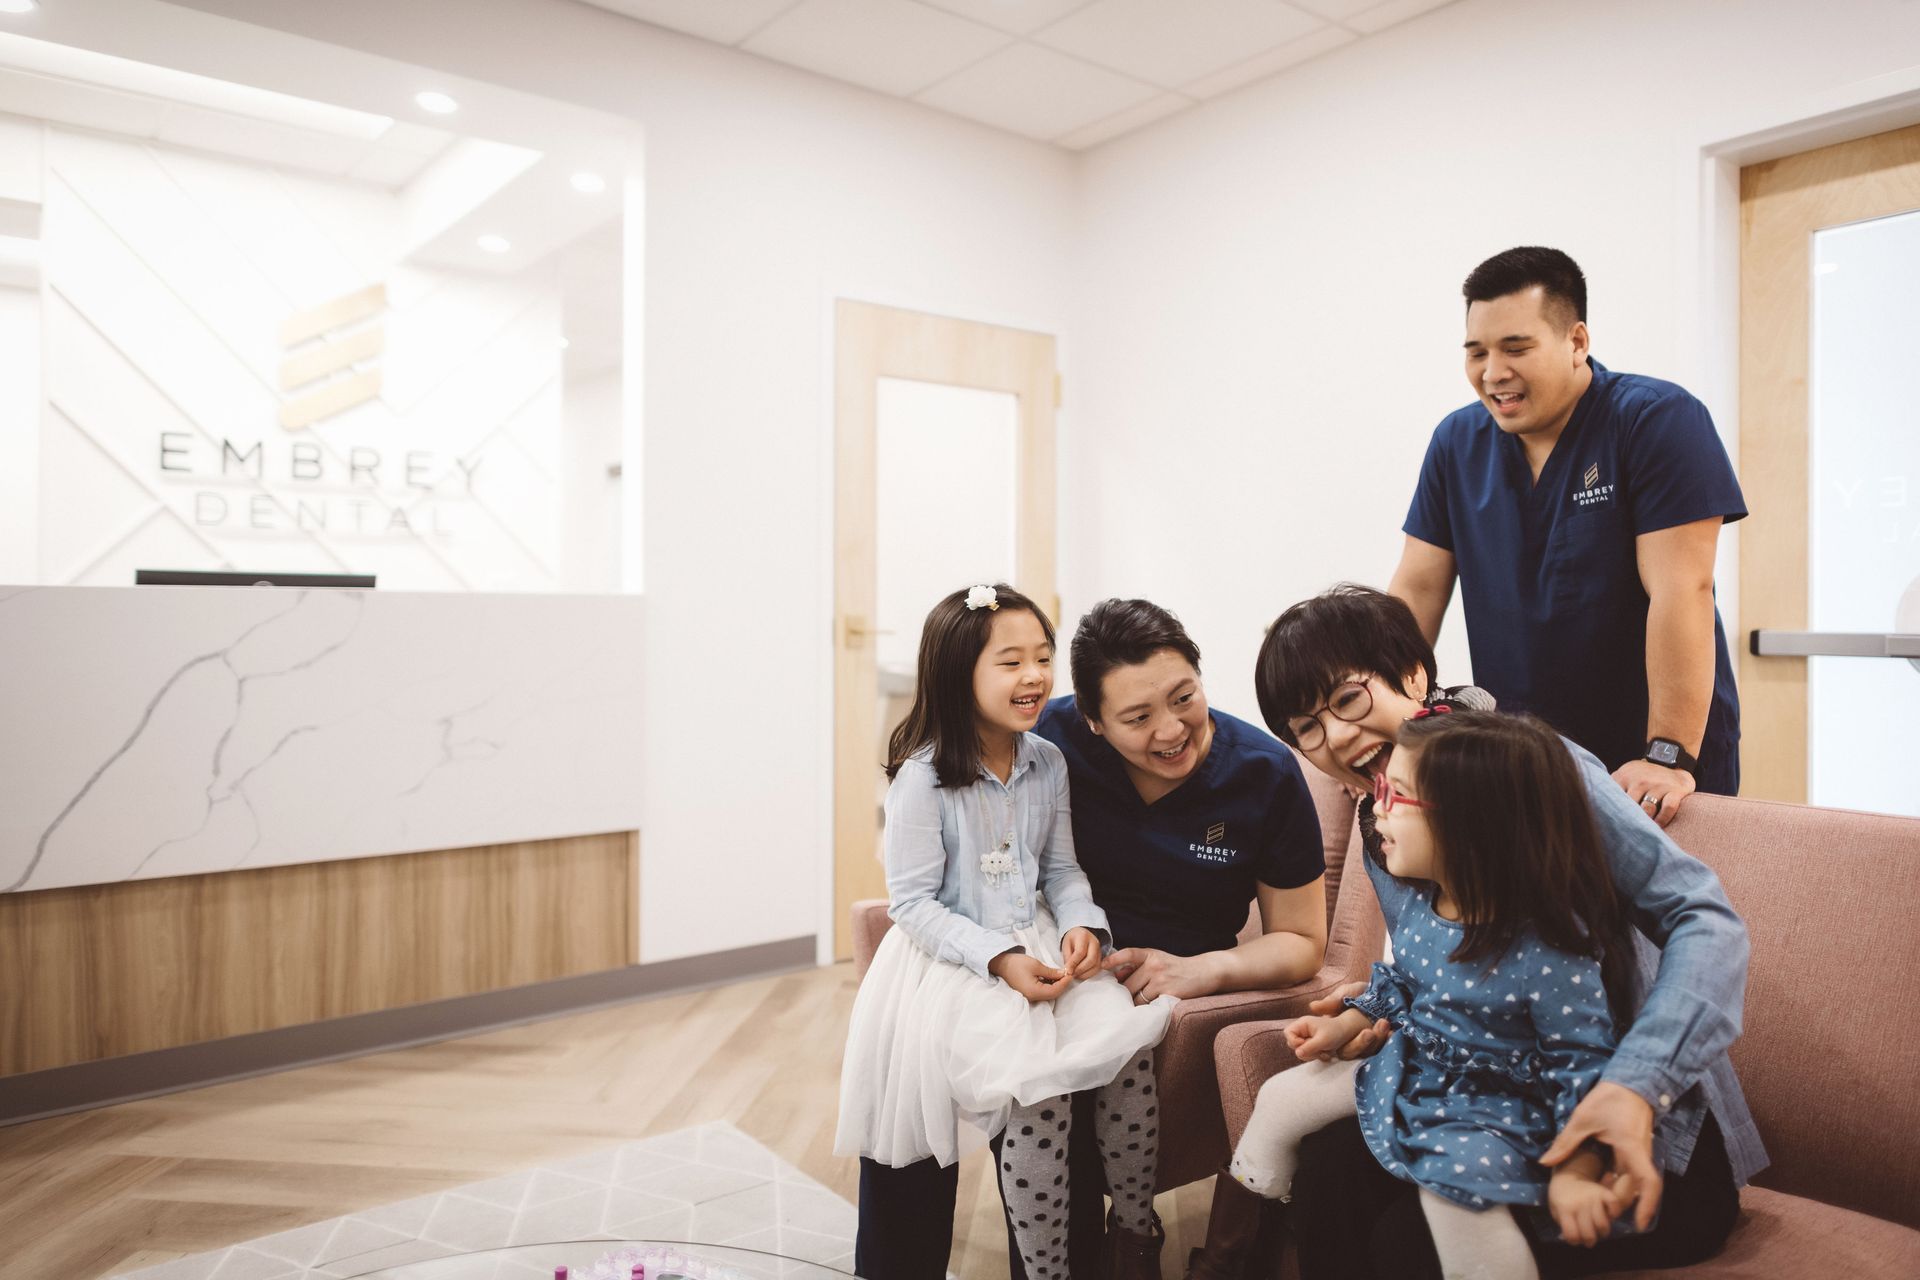 Family dental practice Embrey dental with Dr. Lim and family sitting in the waiting room